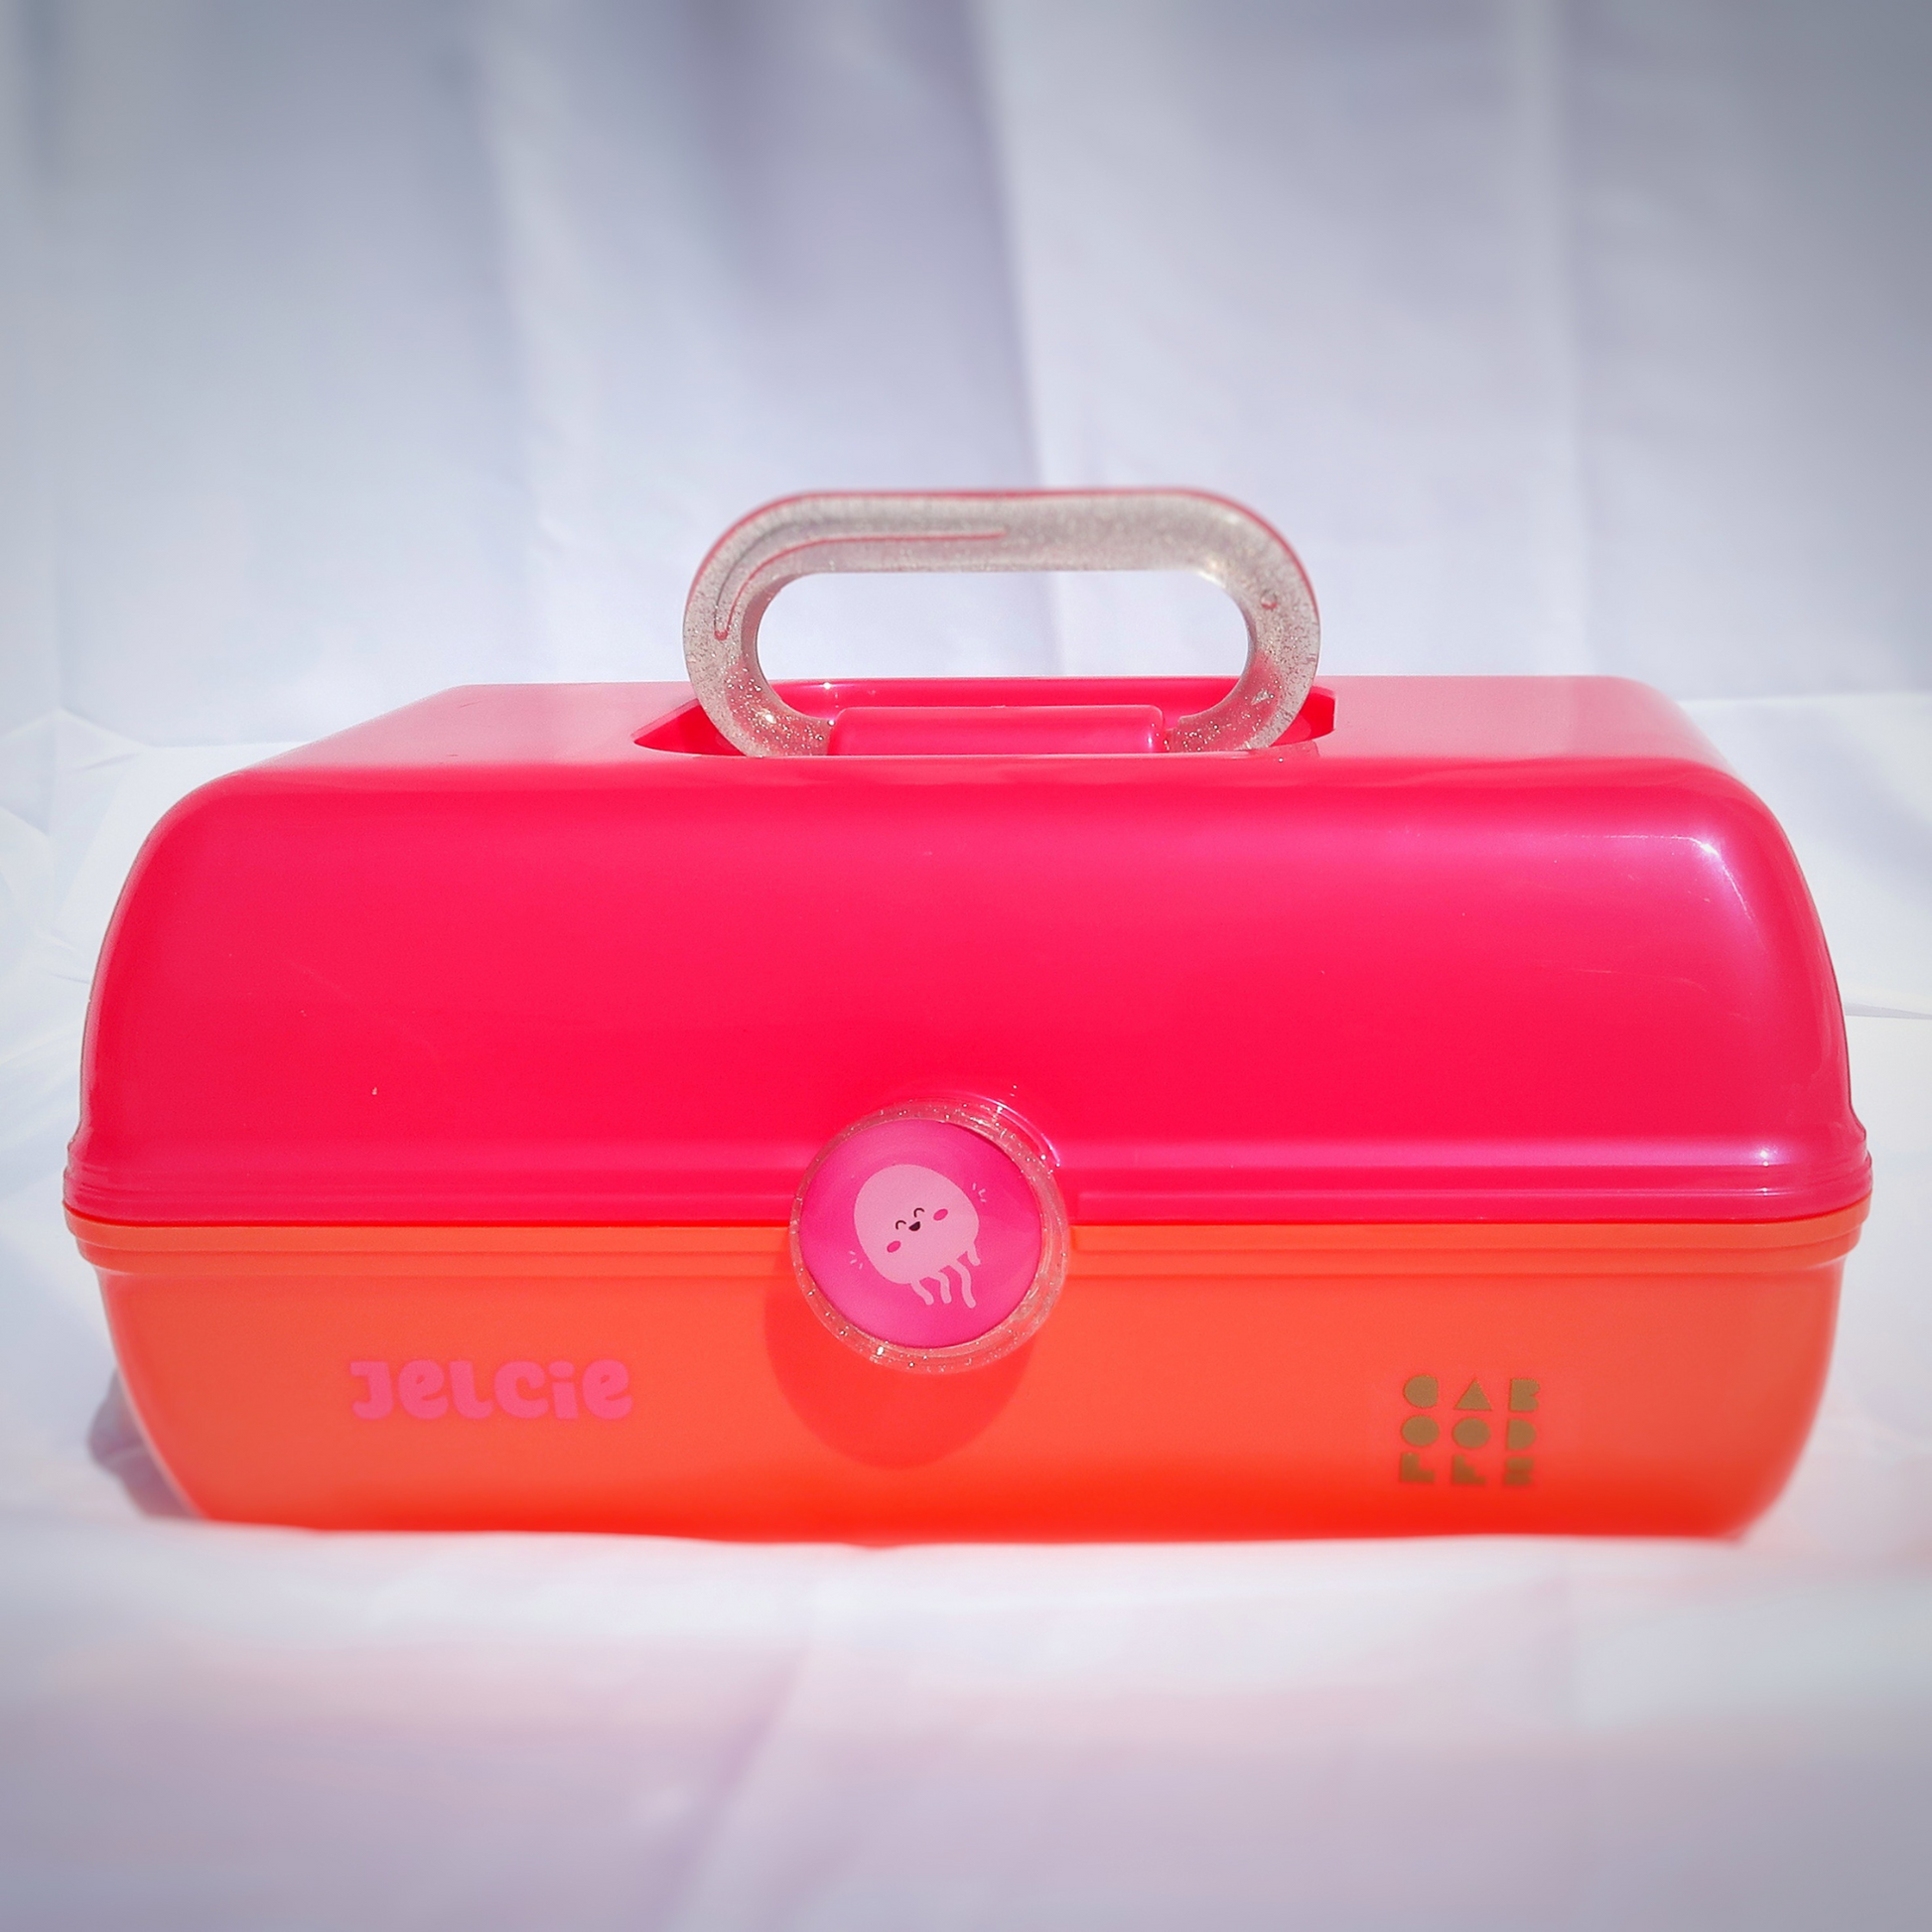 What's Inside Your Caboodles?